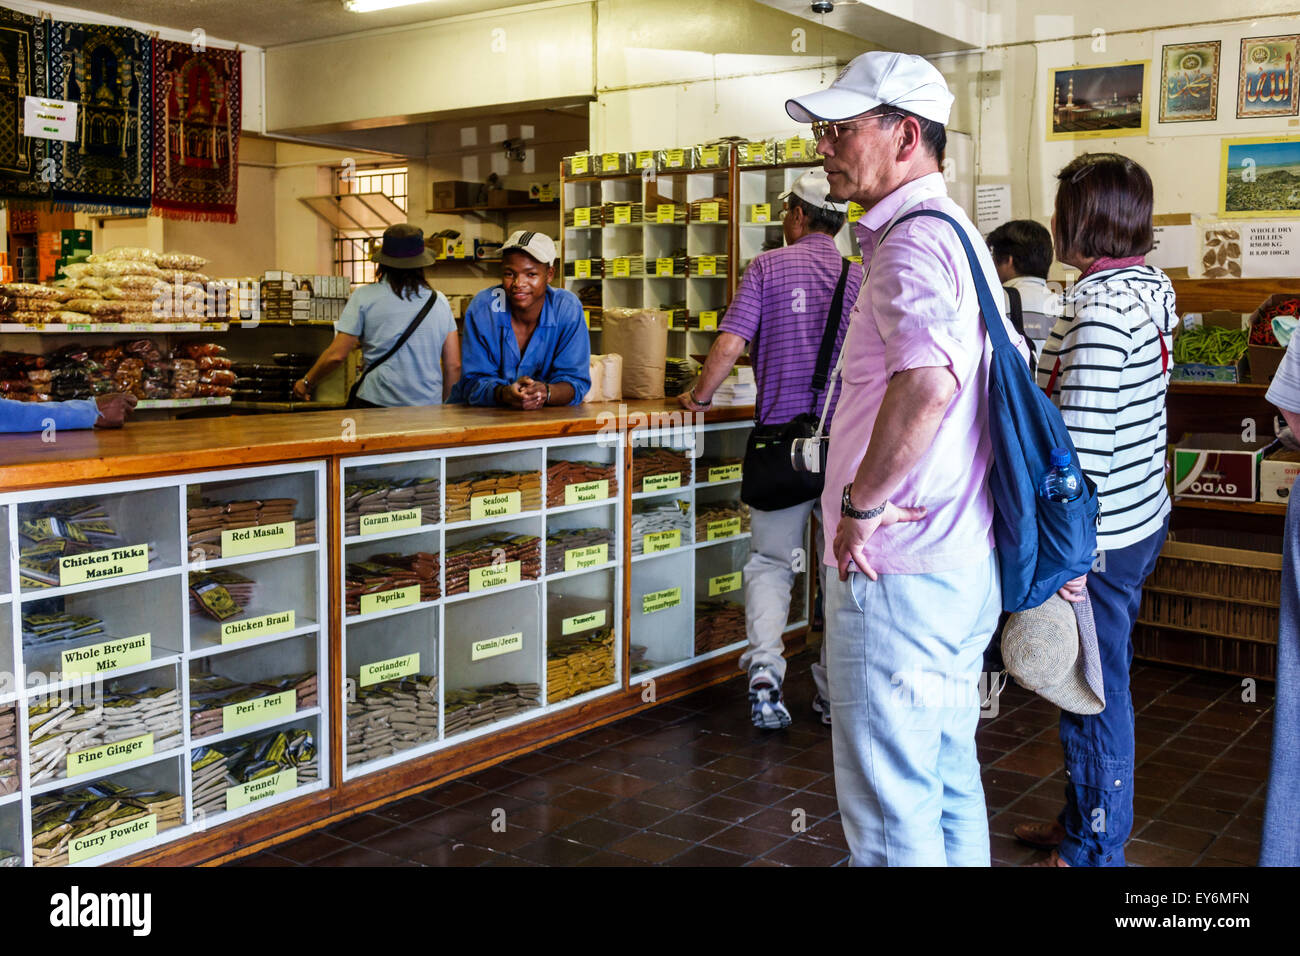 Cape Town South Africa,Bo-Kaap,Schotsche Kloof,Malay Quarter,Wale Street,Muslim,Atlas Trading Company,Indian spice shop,interior inside,counter,Asian Stock Photo